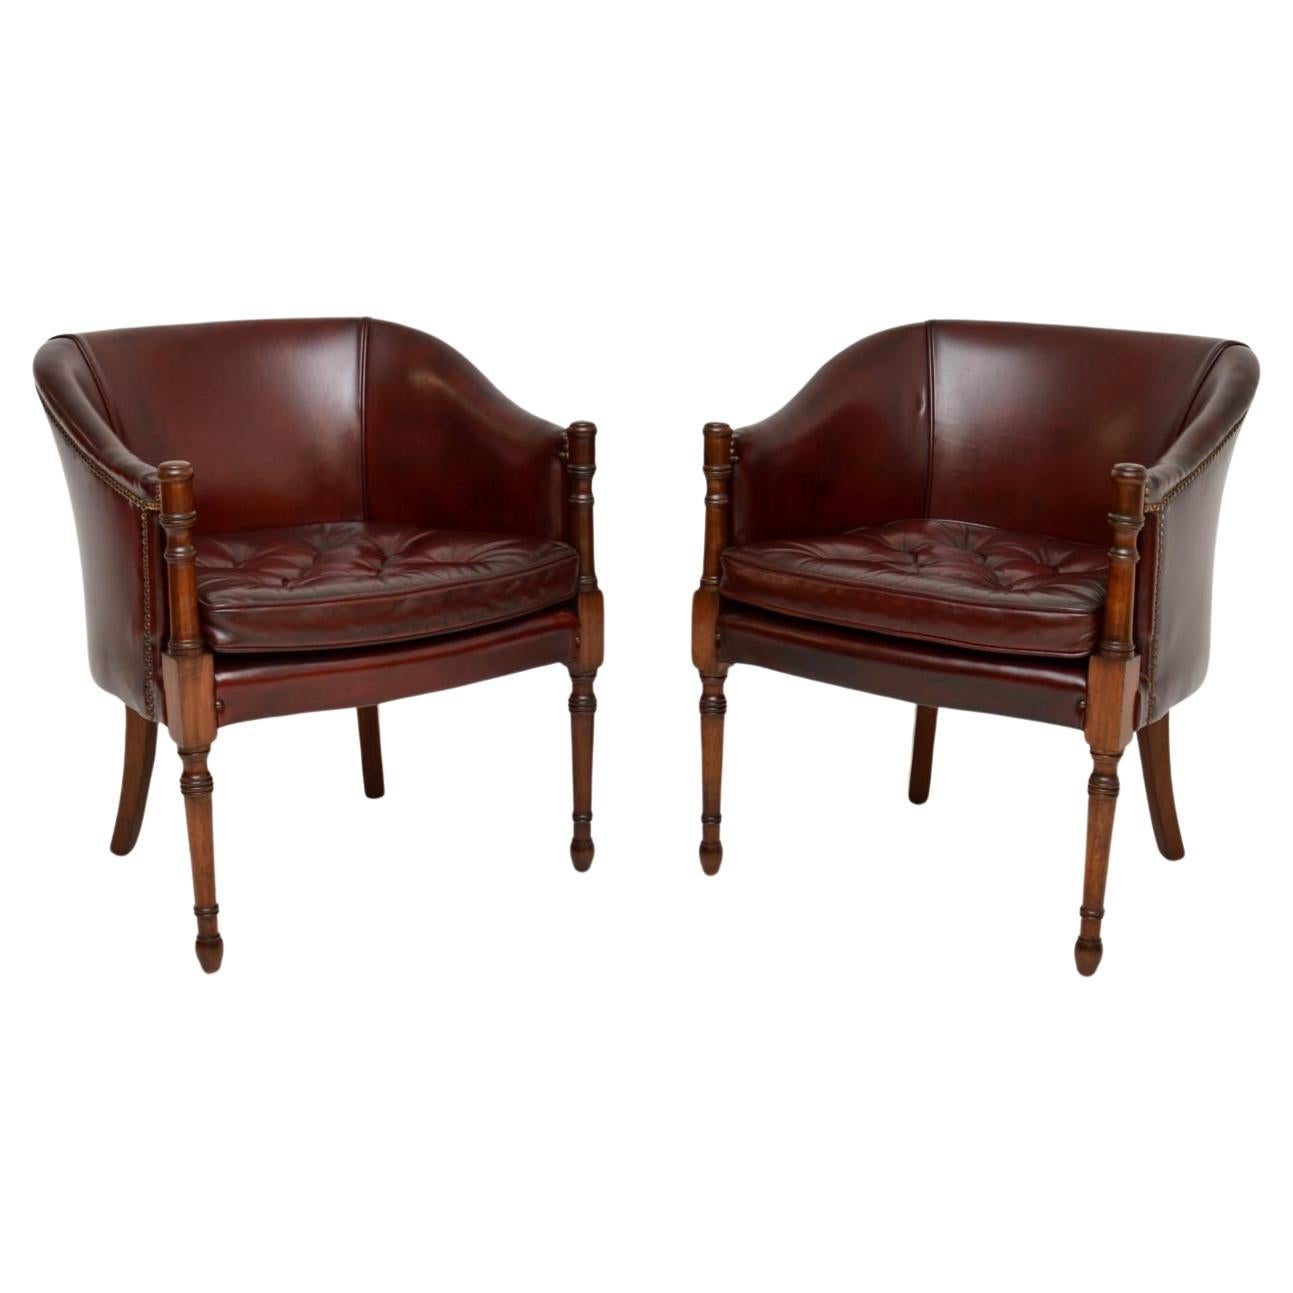 Pair of Antique Georgian Style Leather Armchairs For Sale